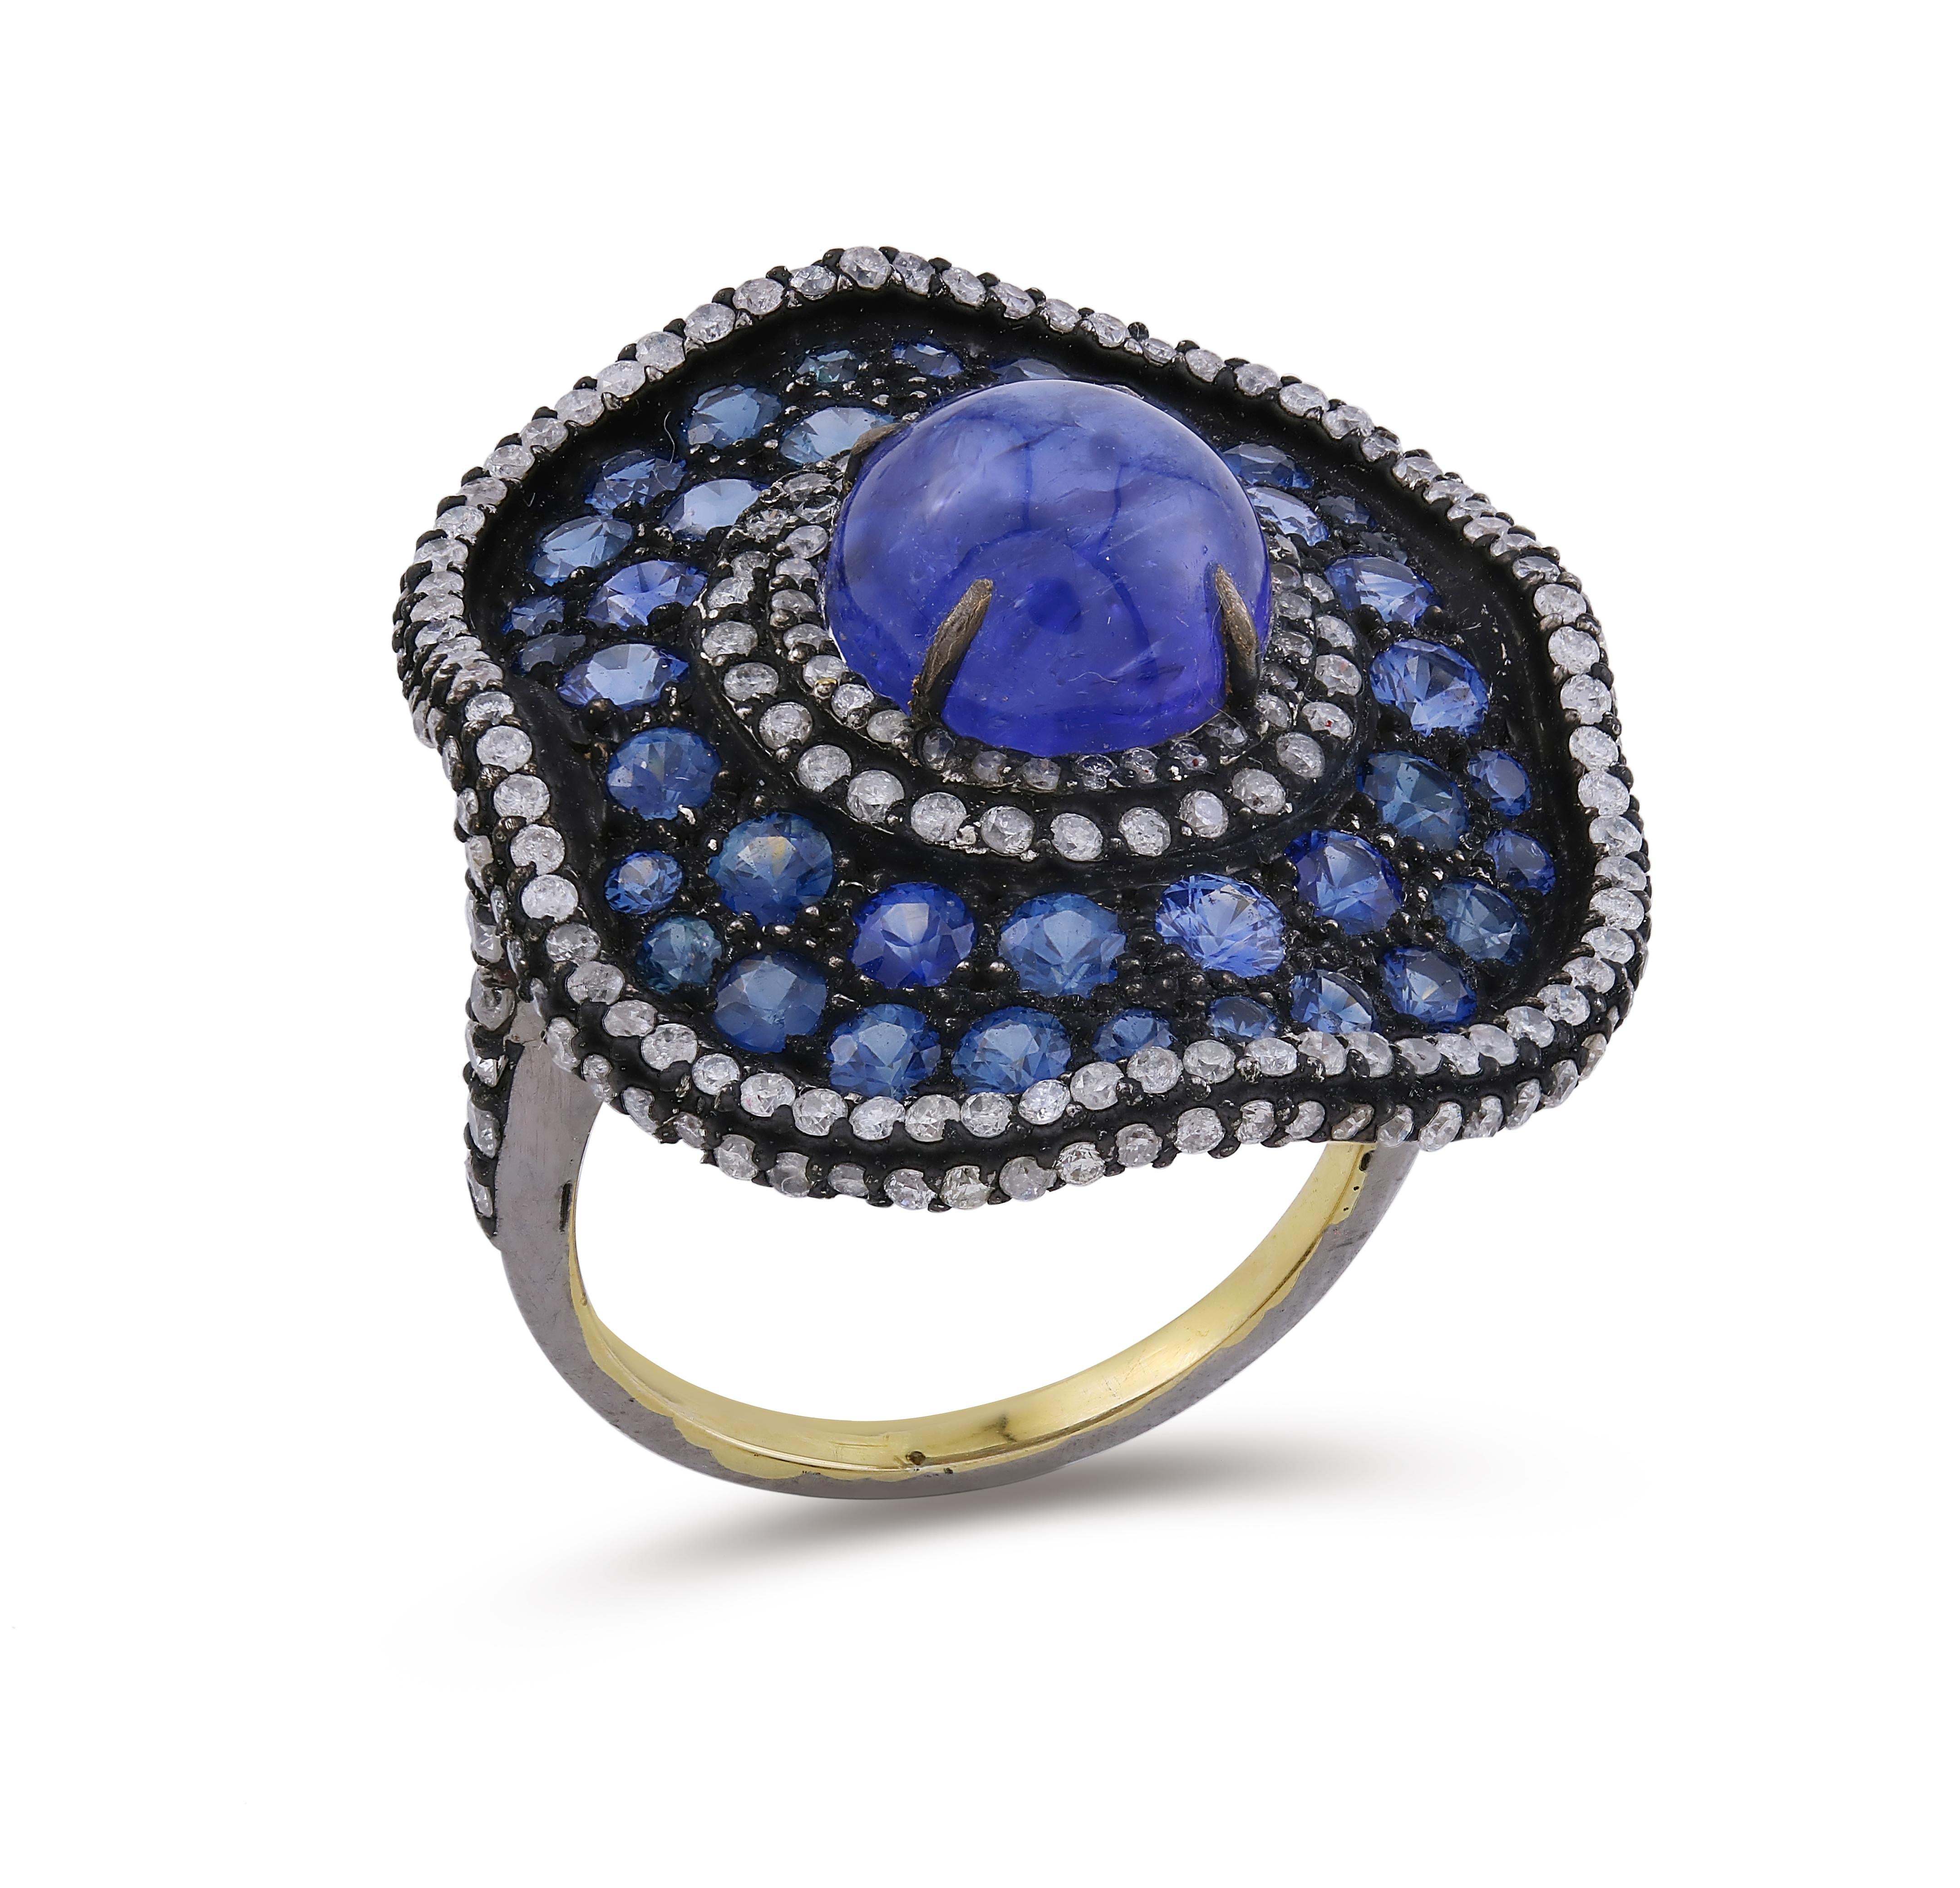 Introducing our exquisite Victorian Floral Cocktail Ring, a mesmerizing work of art that exudes the elegance and opulence of the Victorian era. This magnificent piece features a captivating round cabochon tanzanite, radiant blue sapphires, and